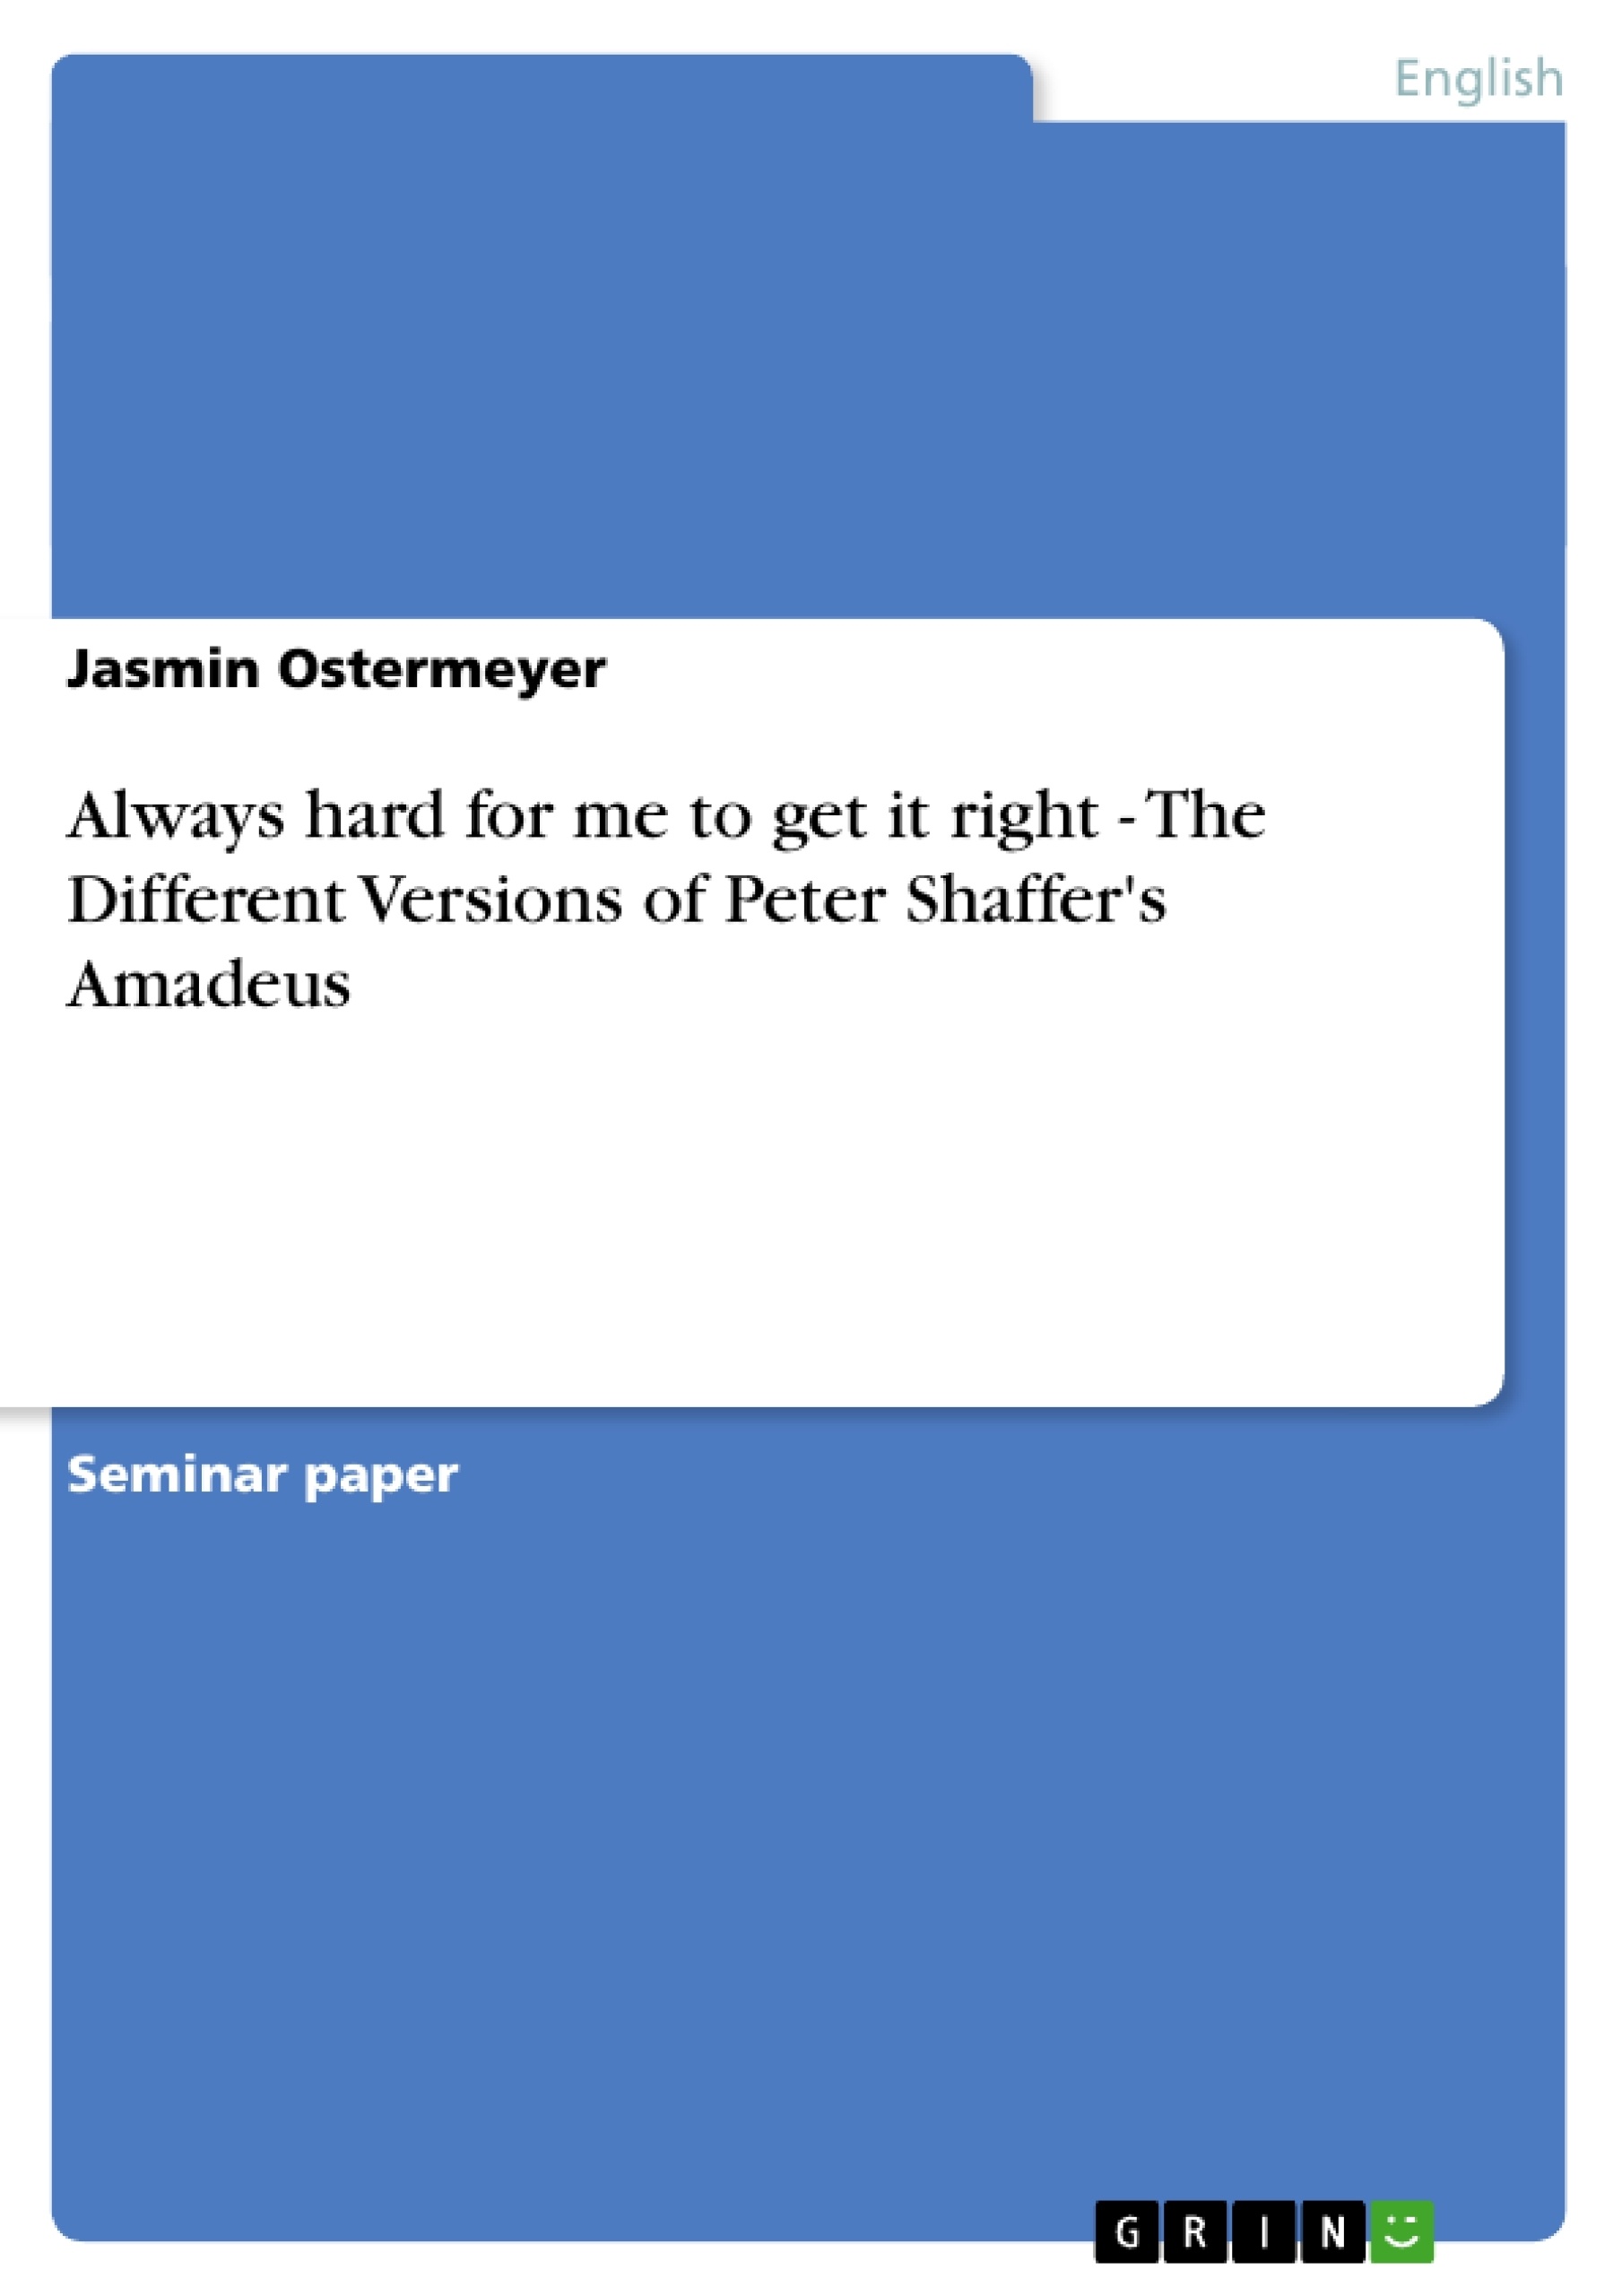 Titre: Always hard for me to get it right - The Different Versions of Peter Shaffer's Amadeus